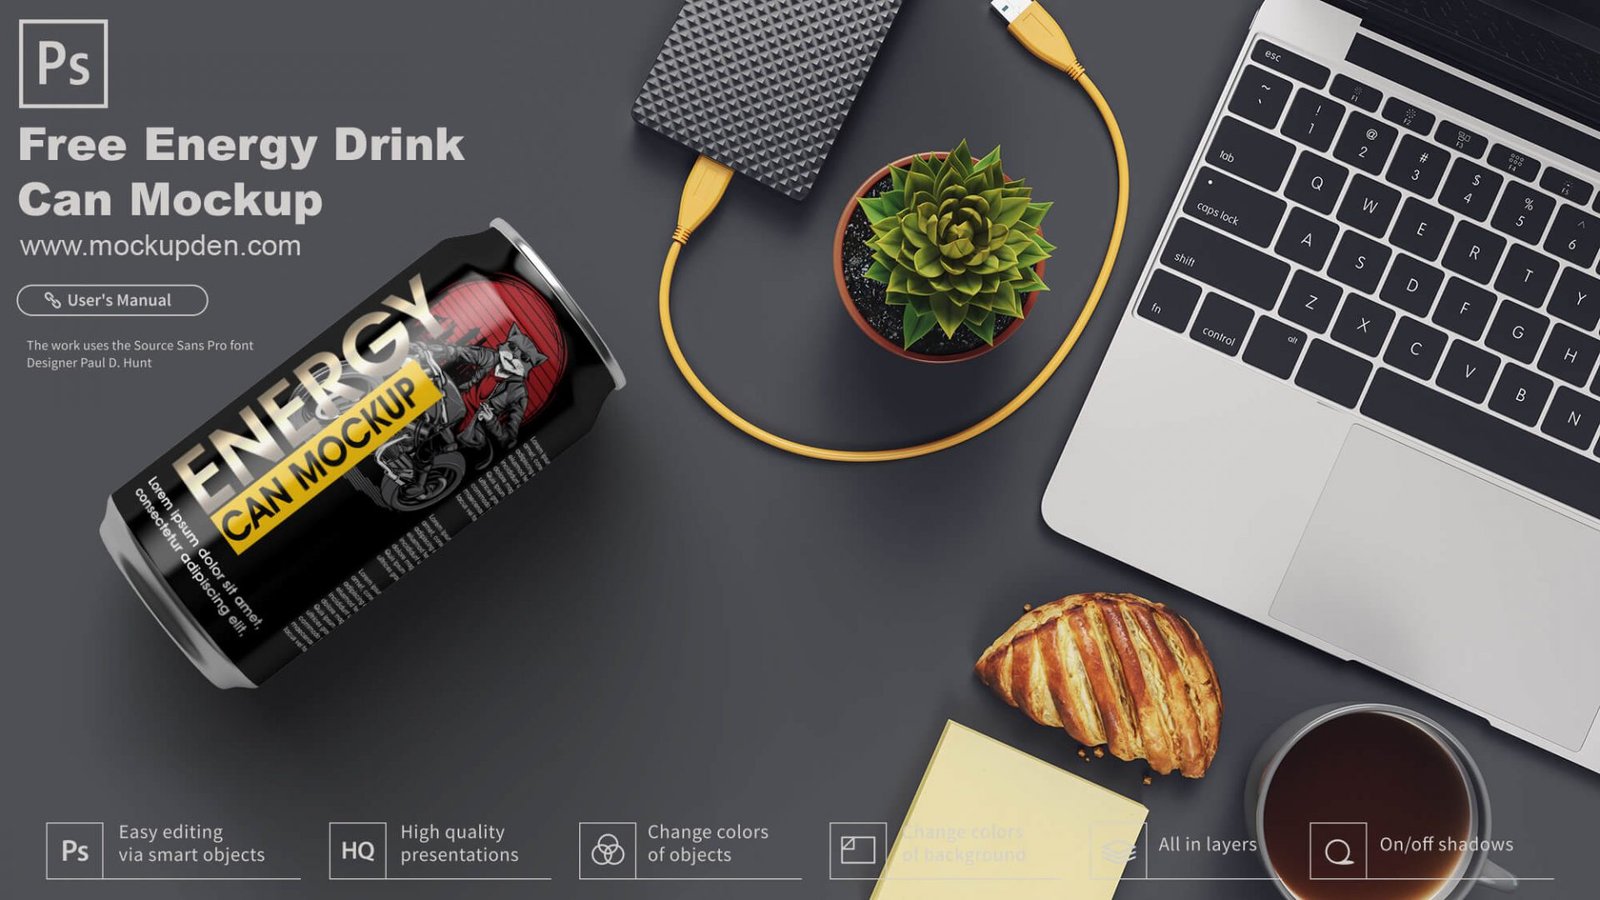 Download Free Energy Drink Can Mockup PSD Template | Mockup Den